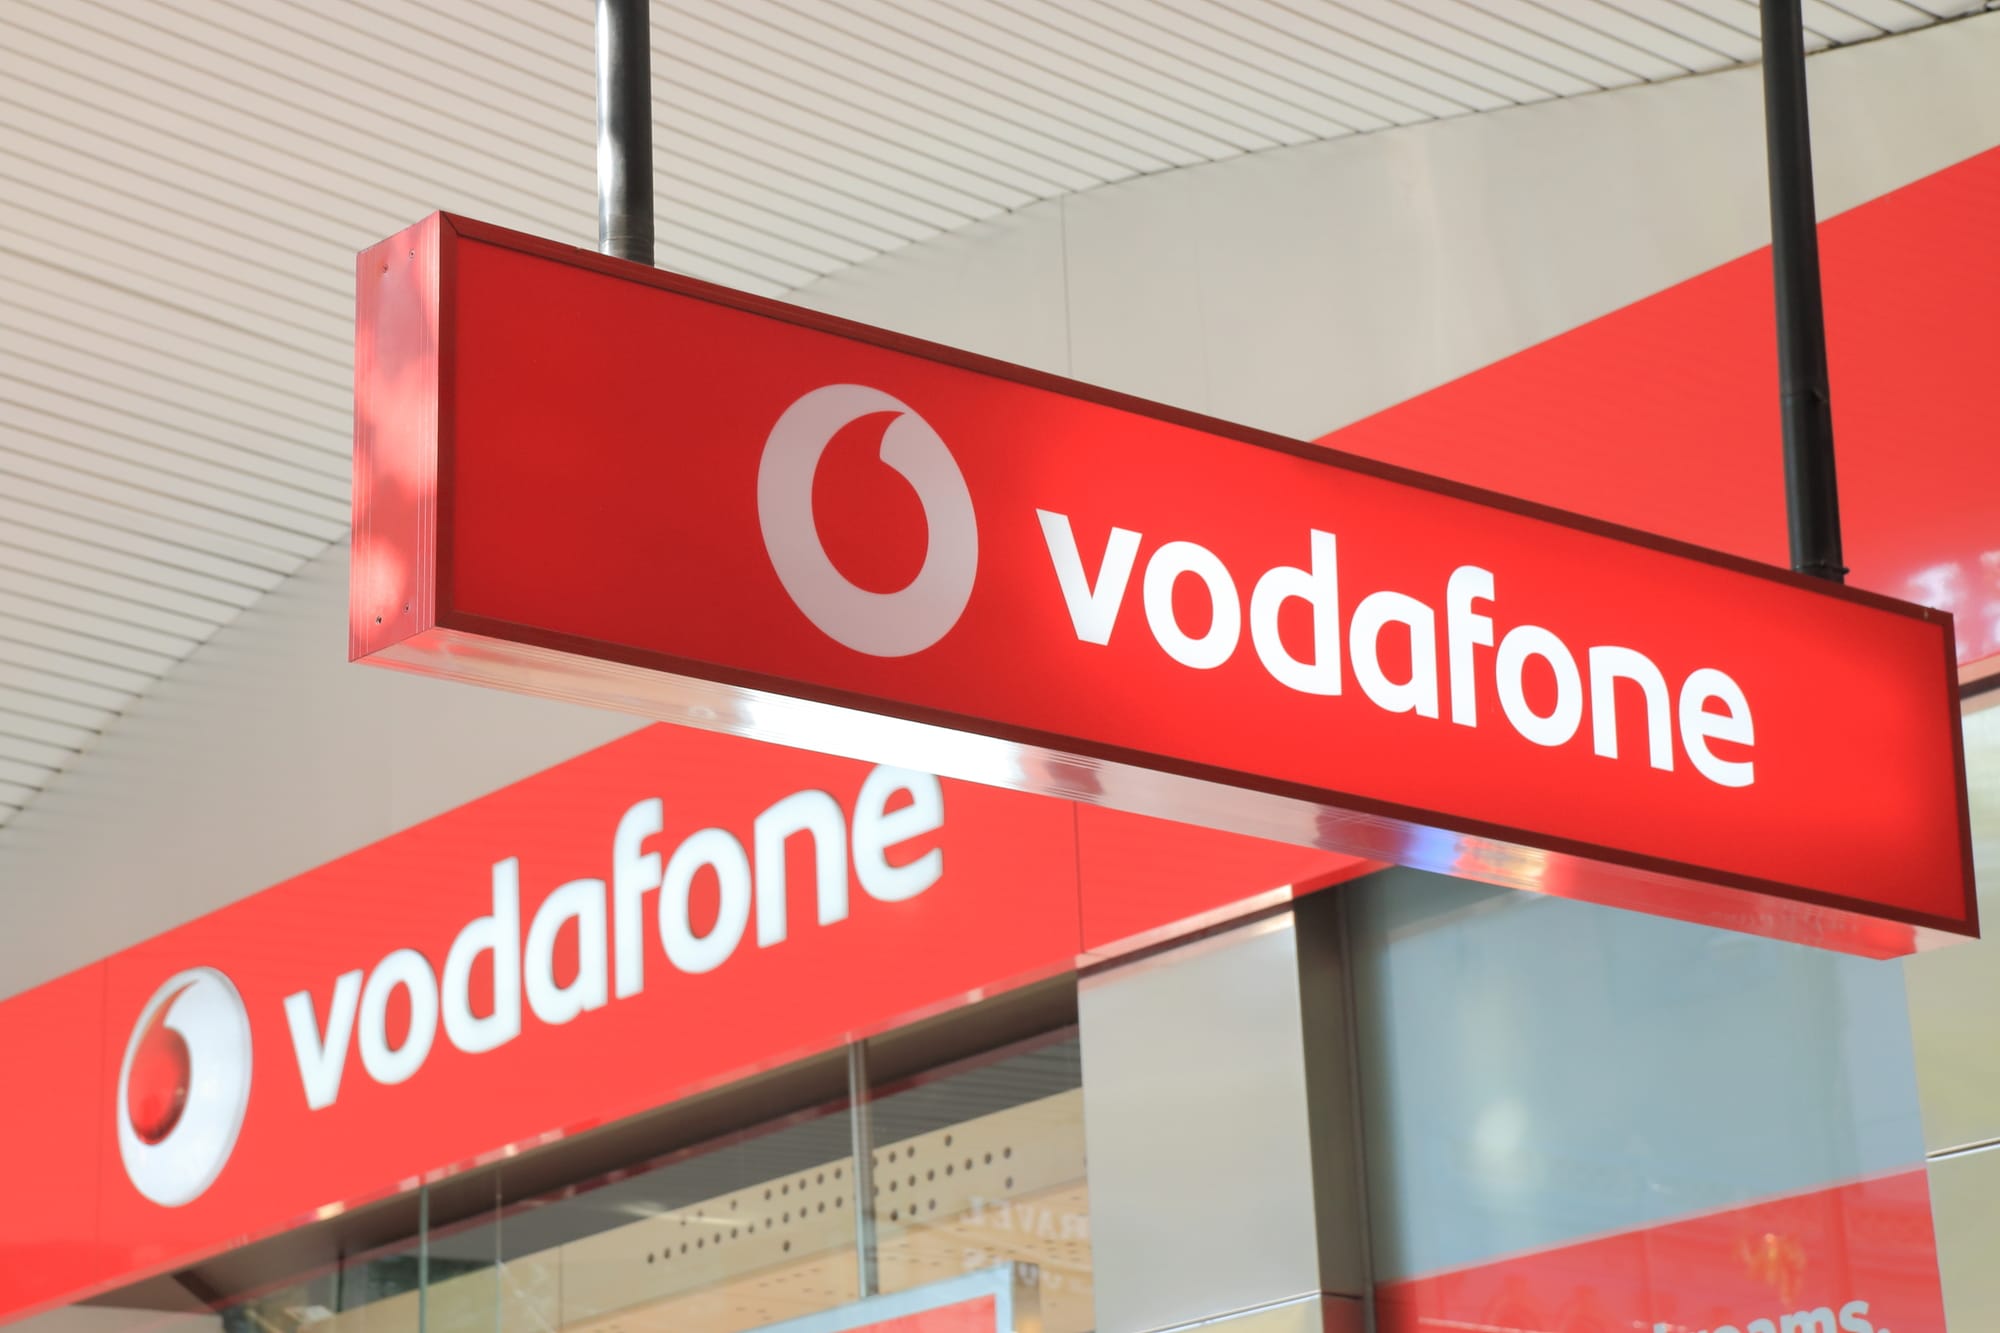 Voldaphone (name of company) kicked off an advertising campaign on Facebook  for Vodafone Play because Voldaphone